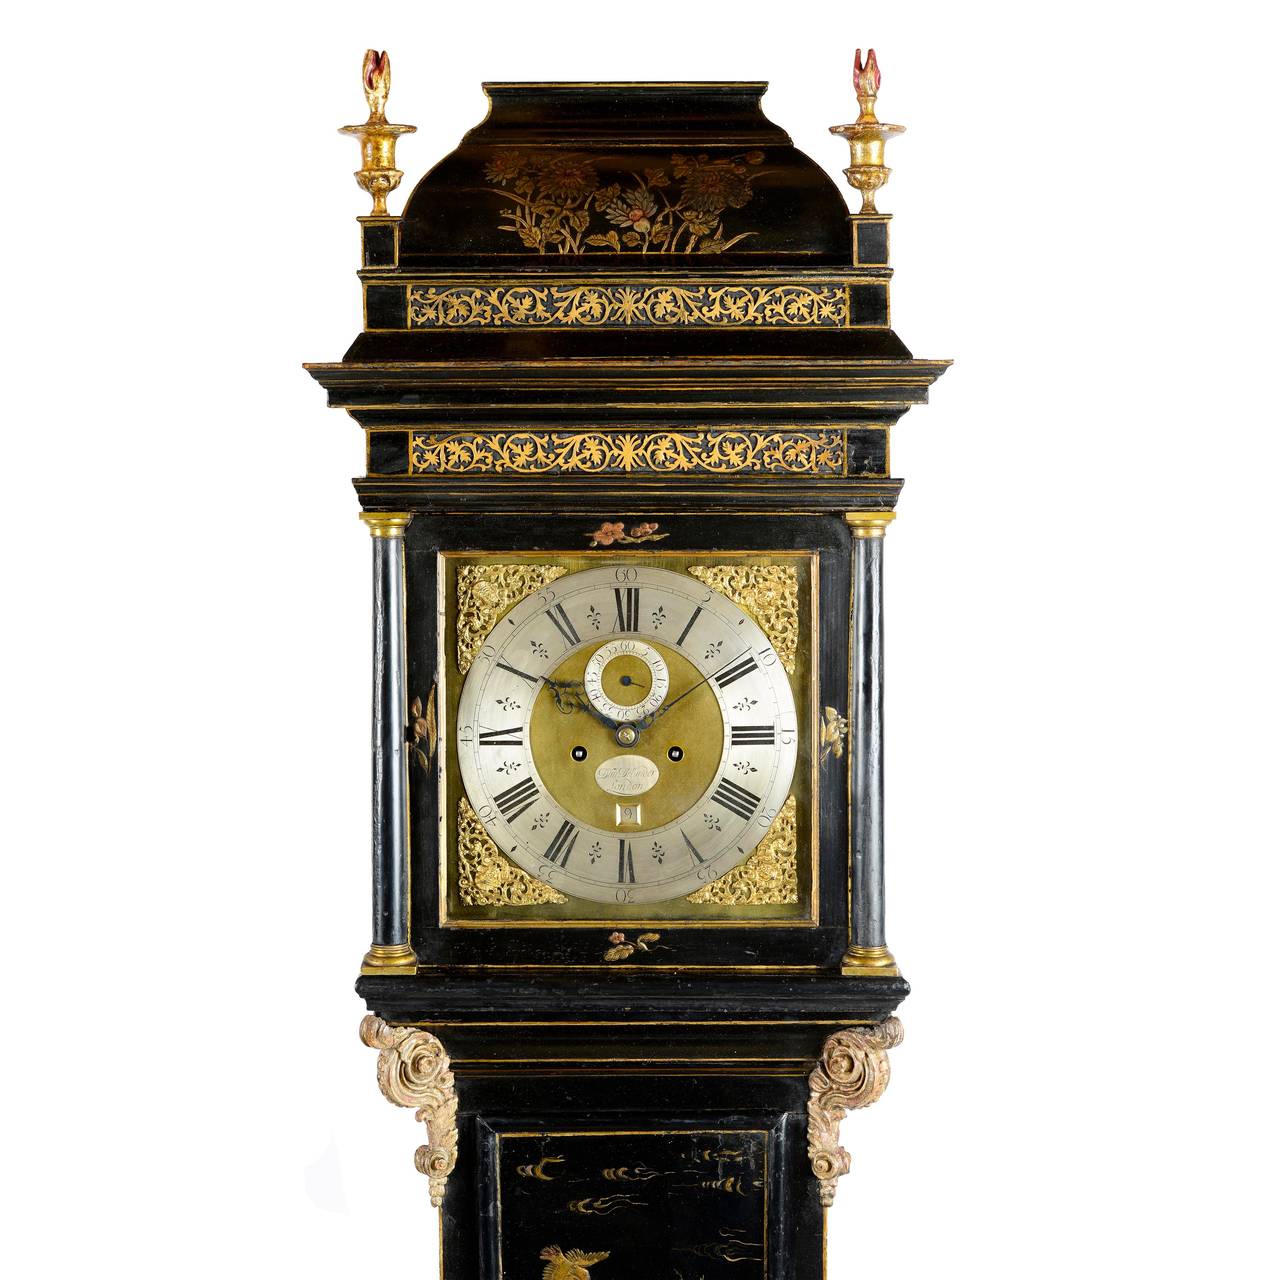 A highly important Queen Anne export lacquer longcase clock by Daniel DeLander, London. The exquisite lacquer German, possibly by Martin Schnell, Dresden. 

The case with flambeau urn finials and tall  caddy decorated in raised polychrome and gilt